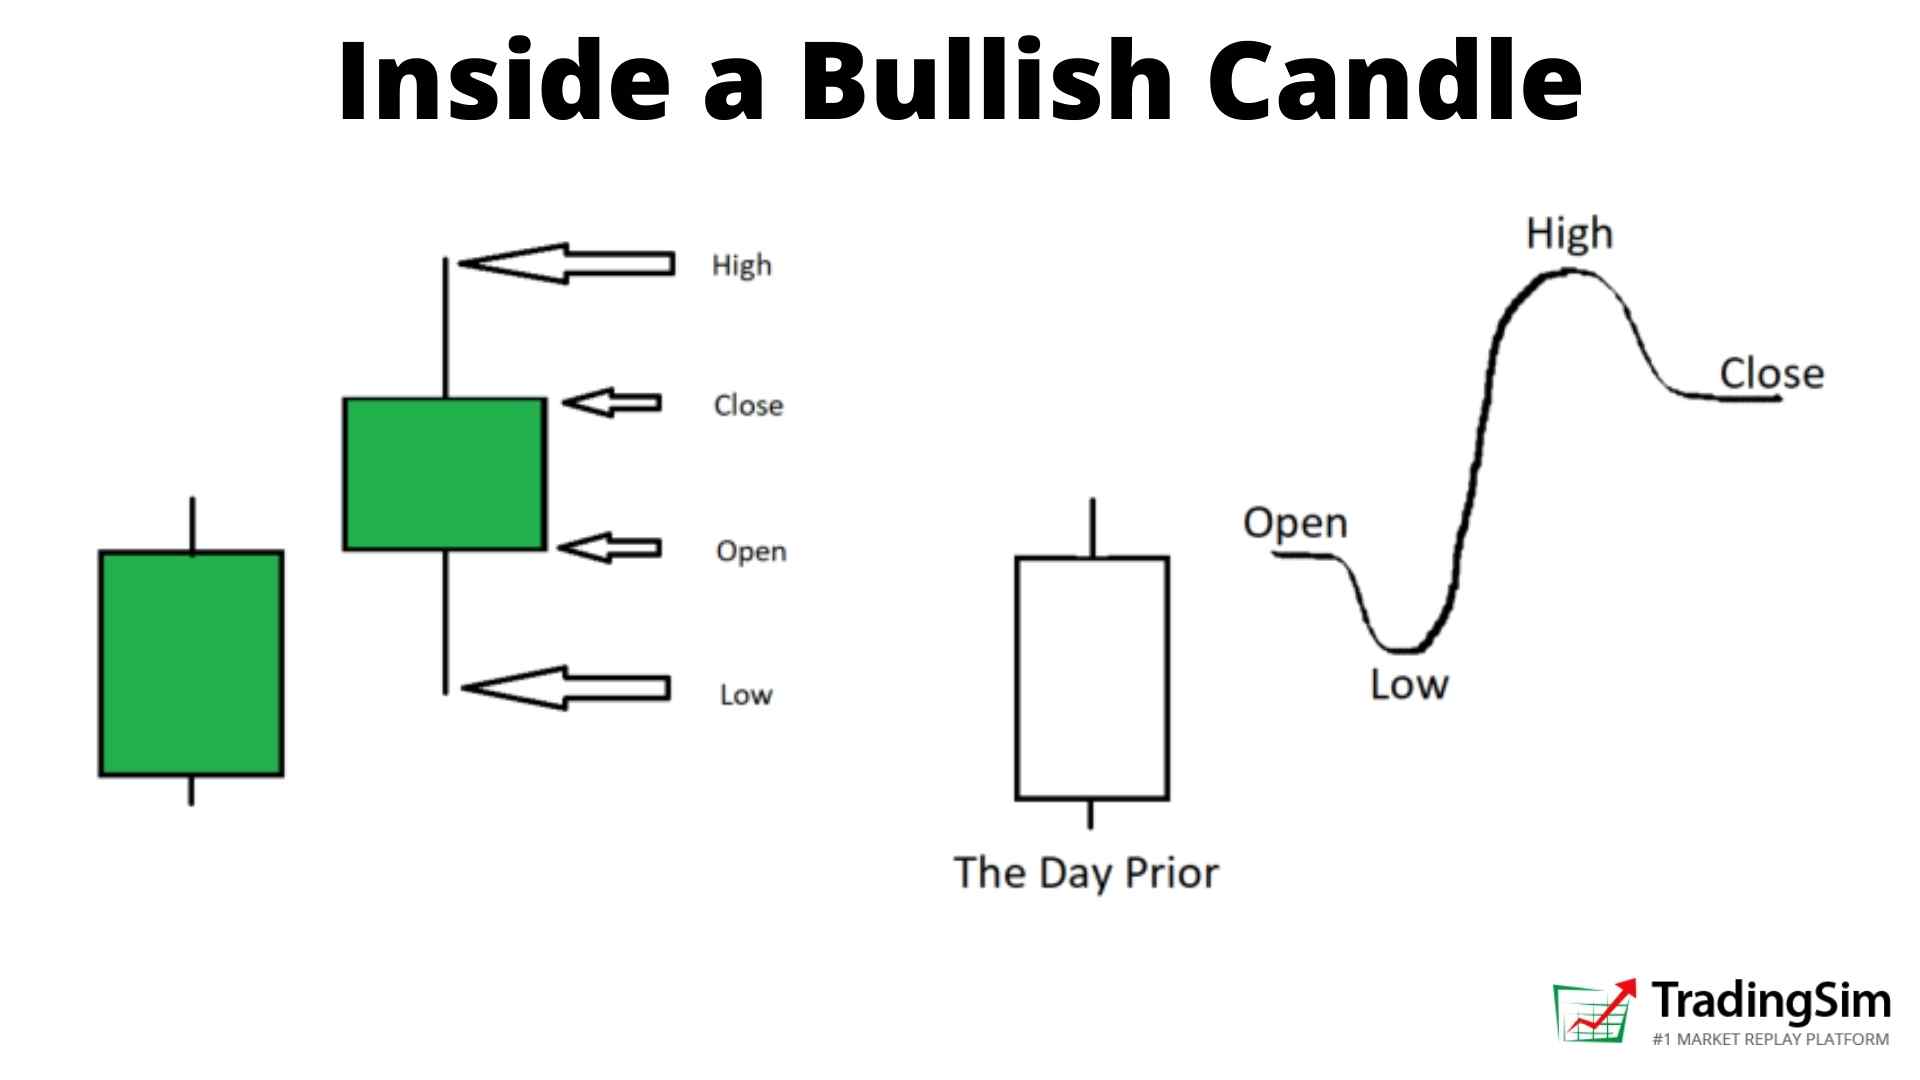 How a daily candle is formed